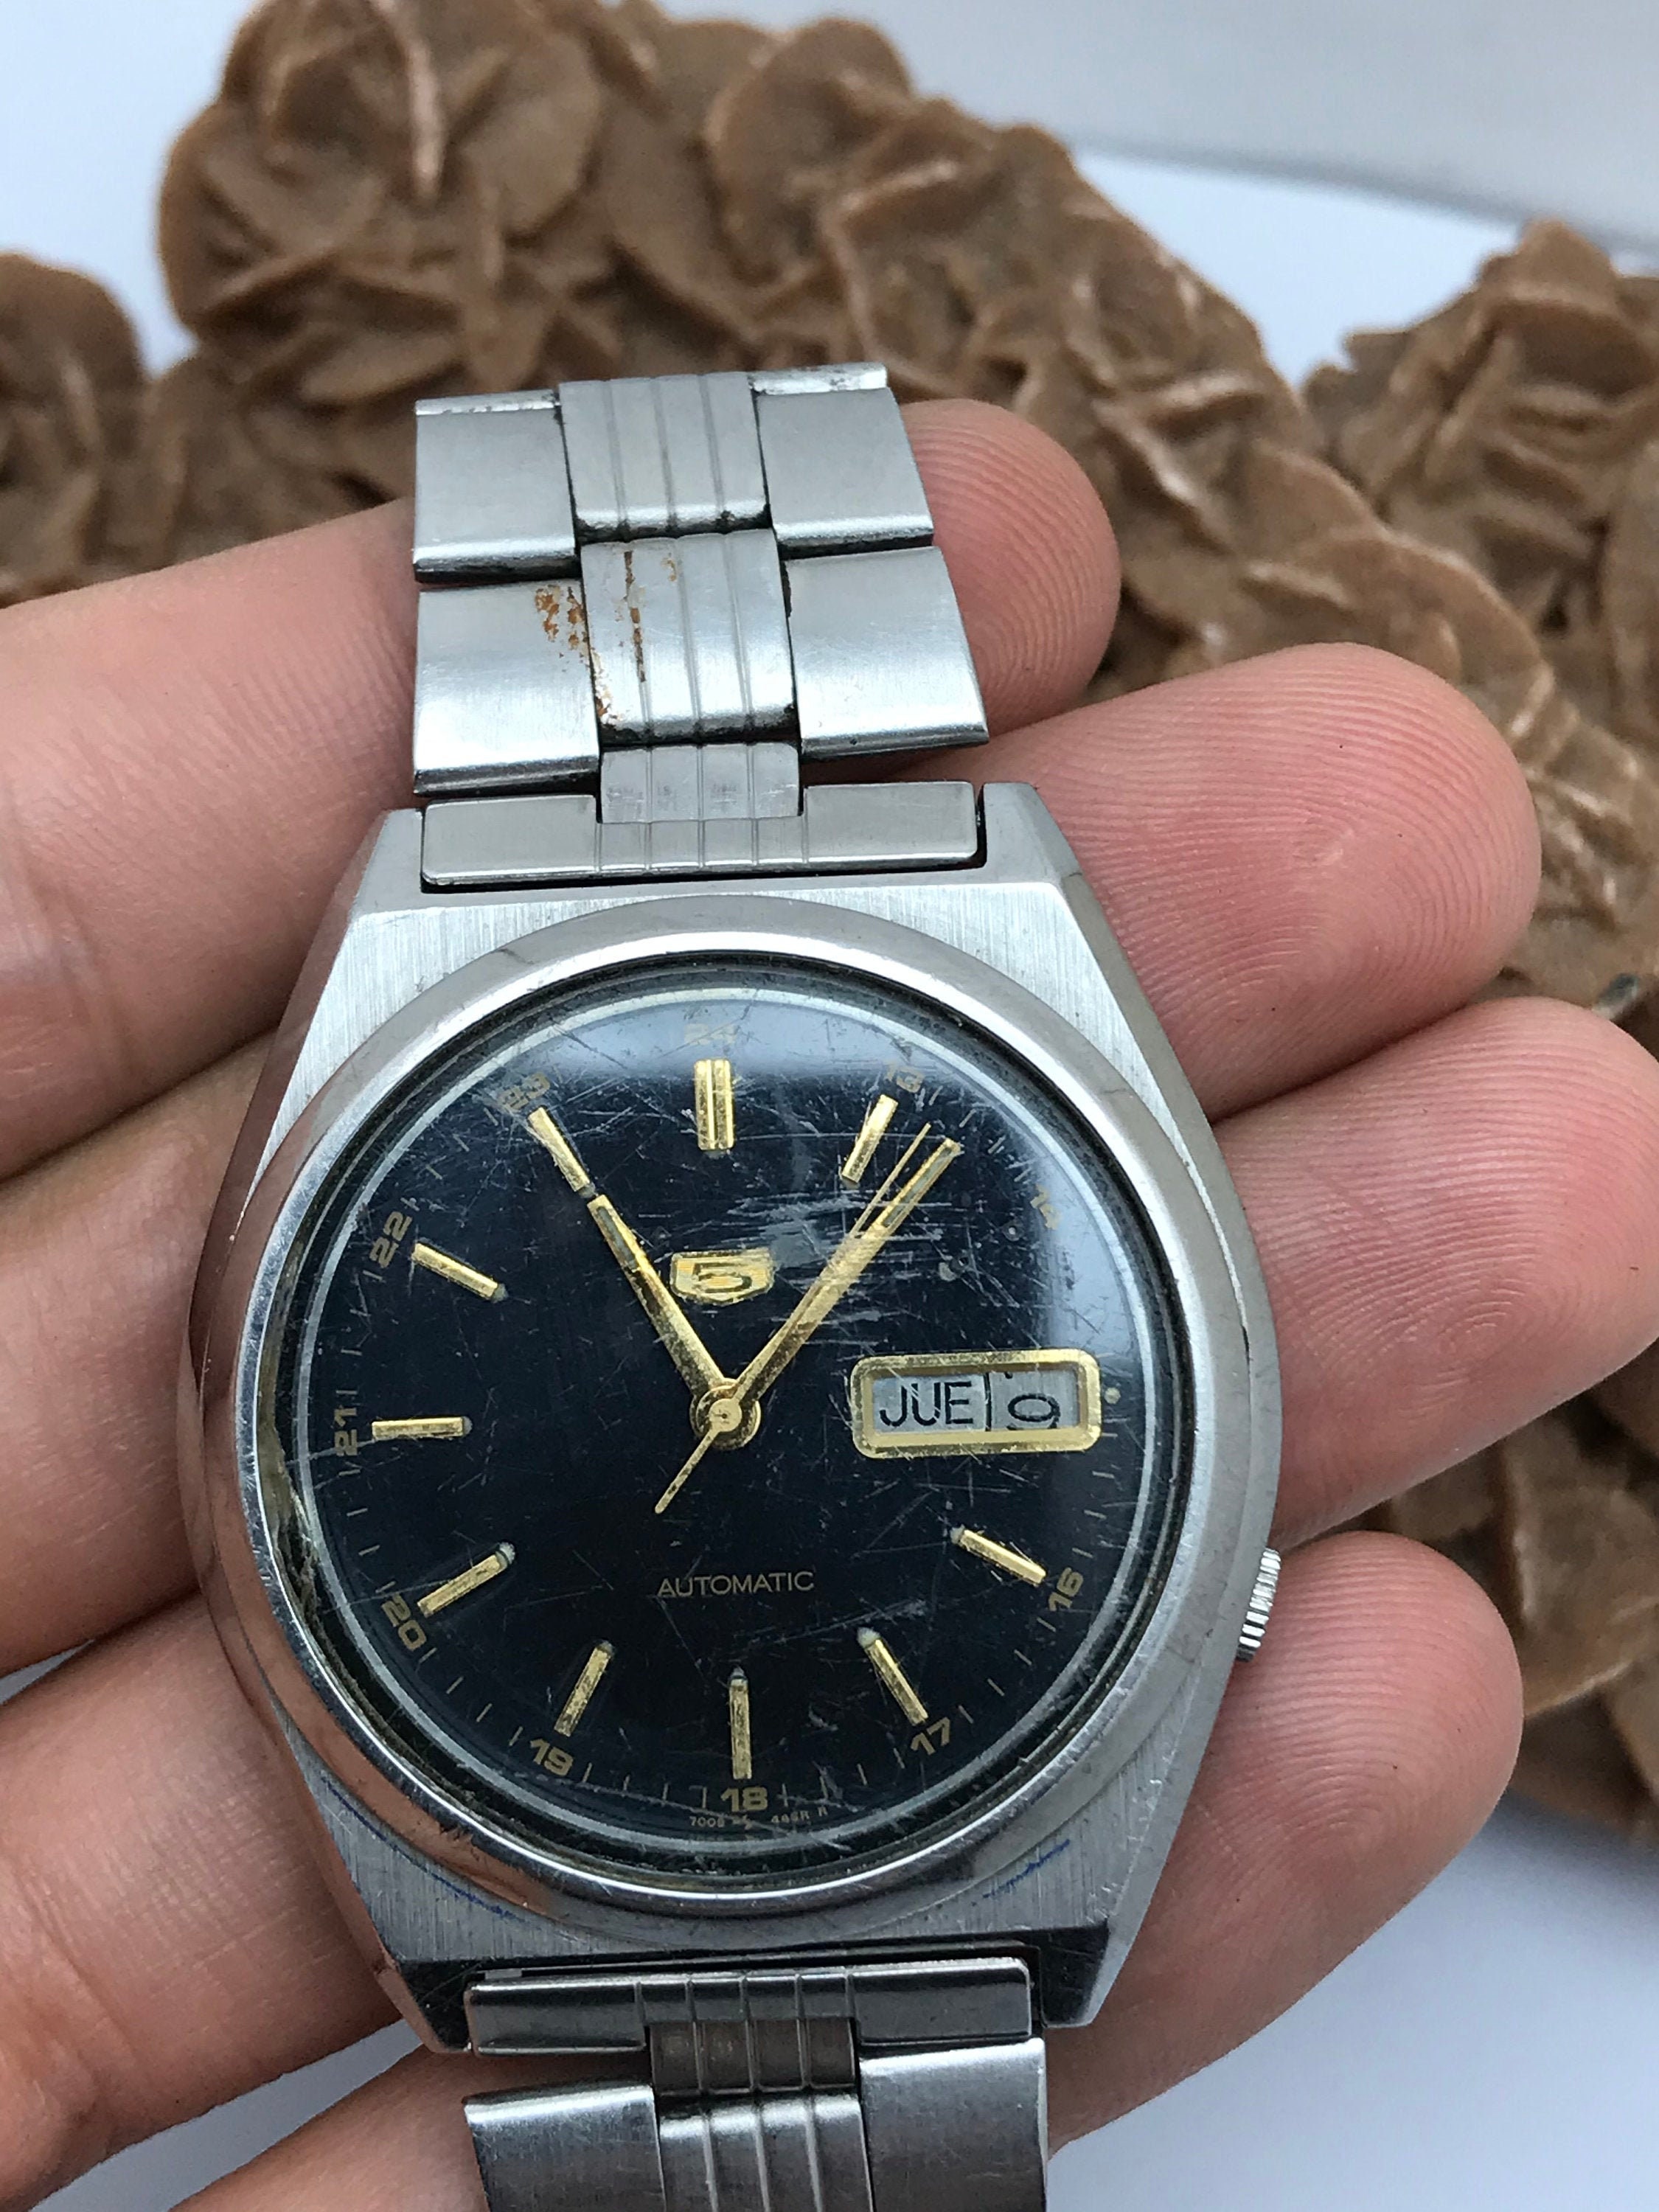 Buy Old Seiko Watch Online In India - Etsy India